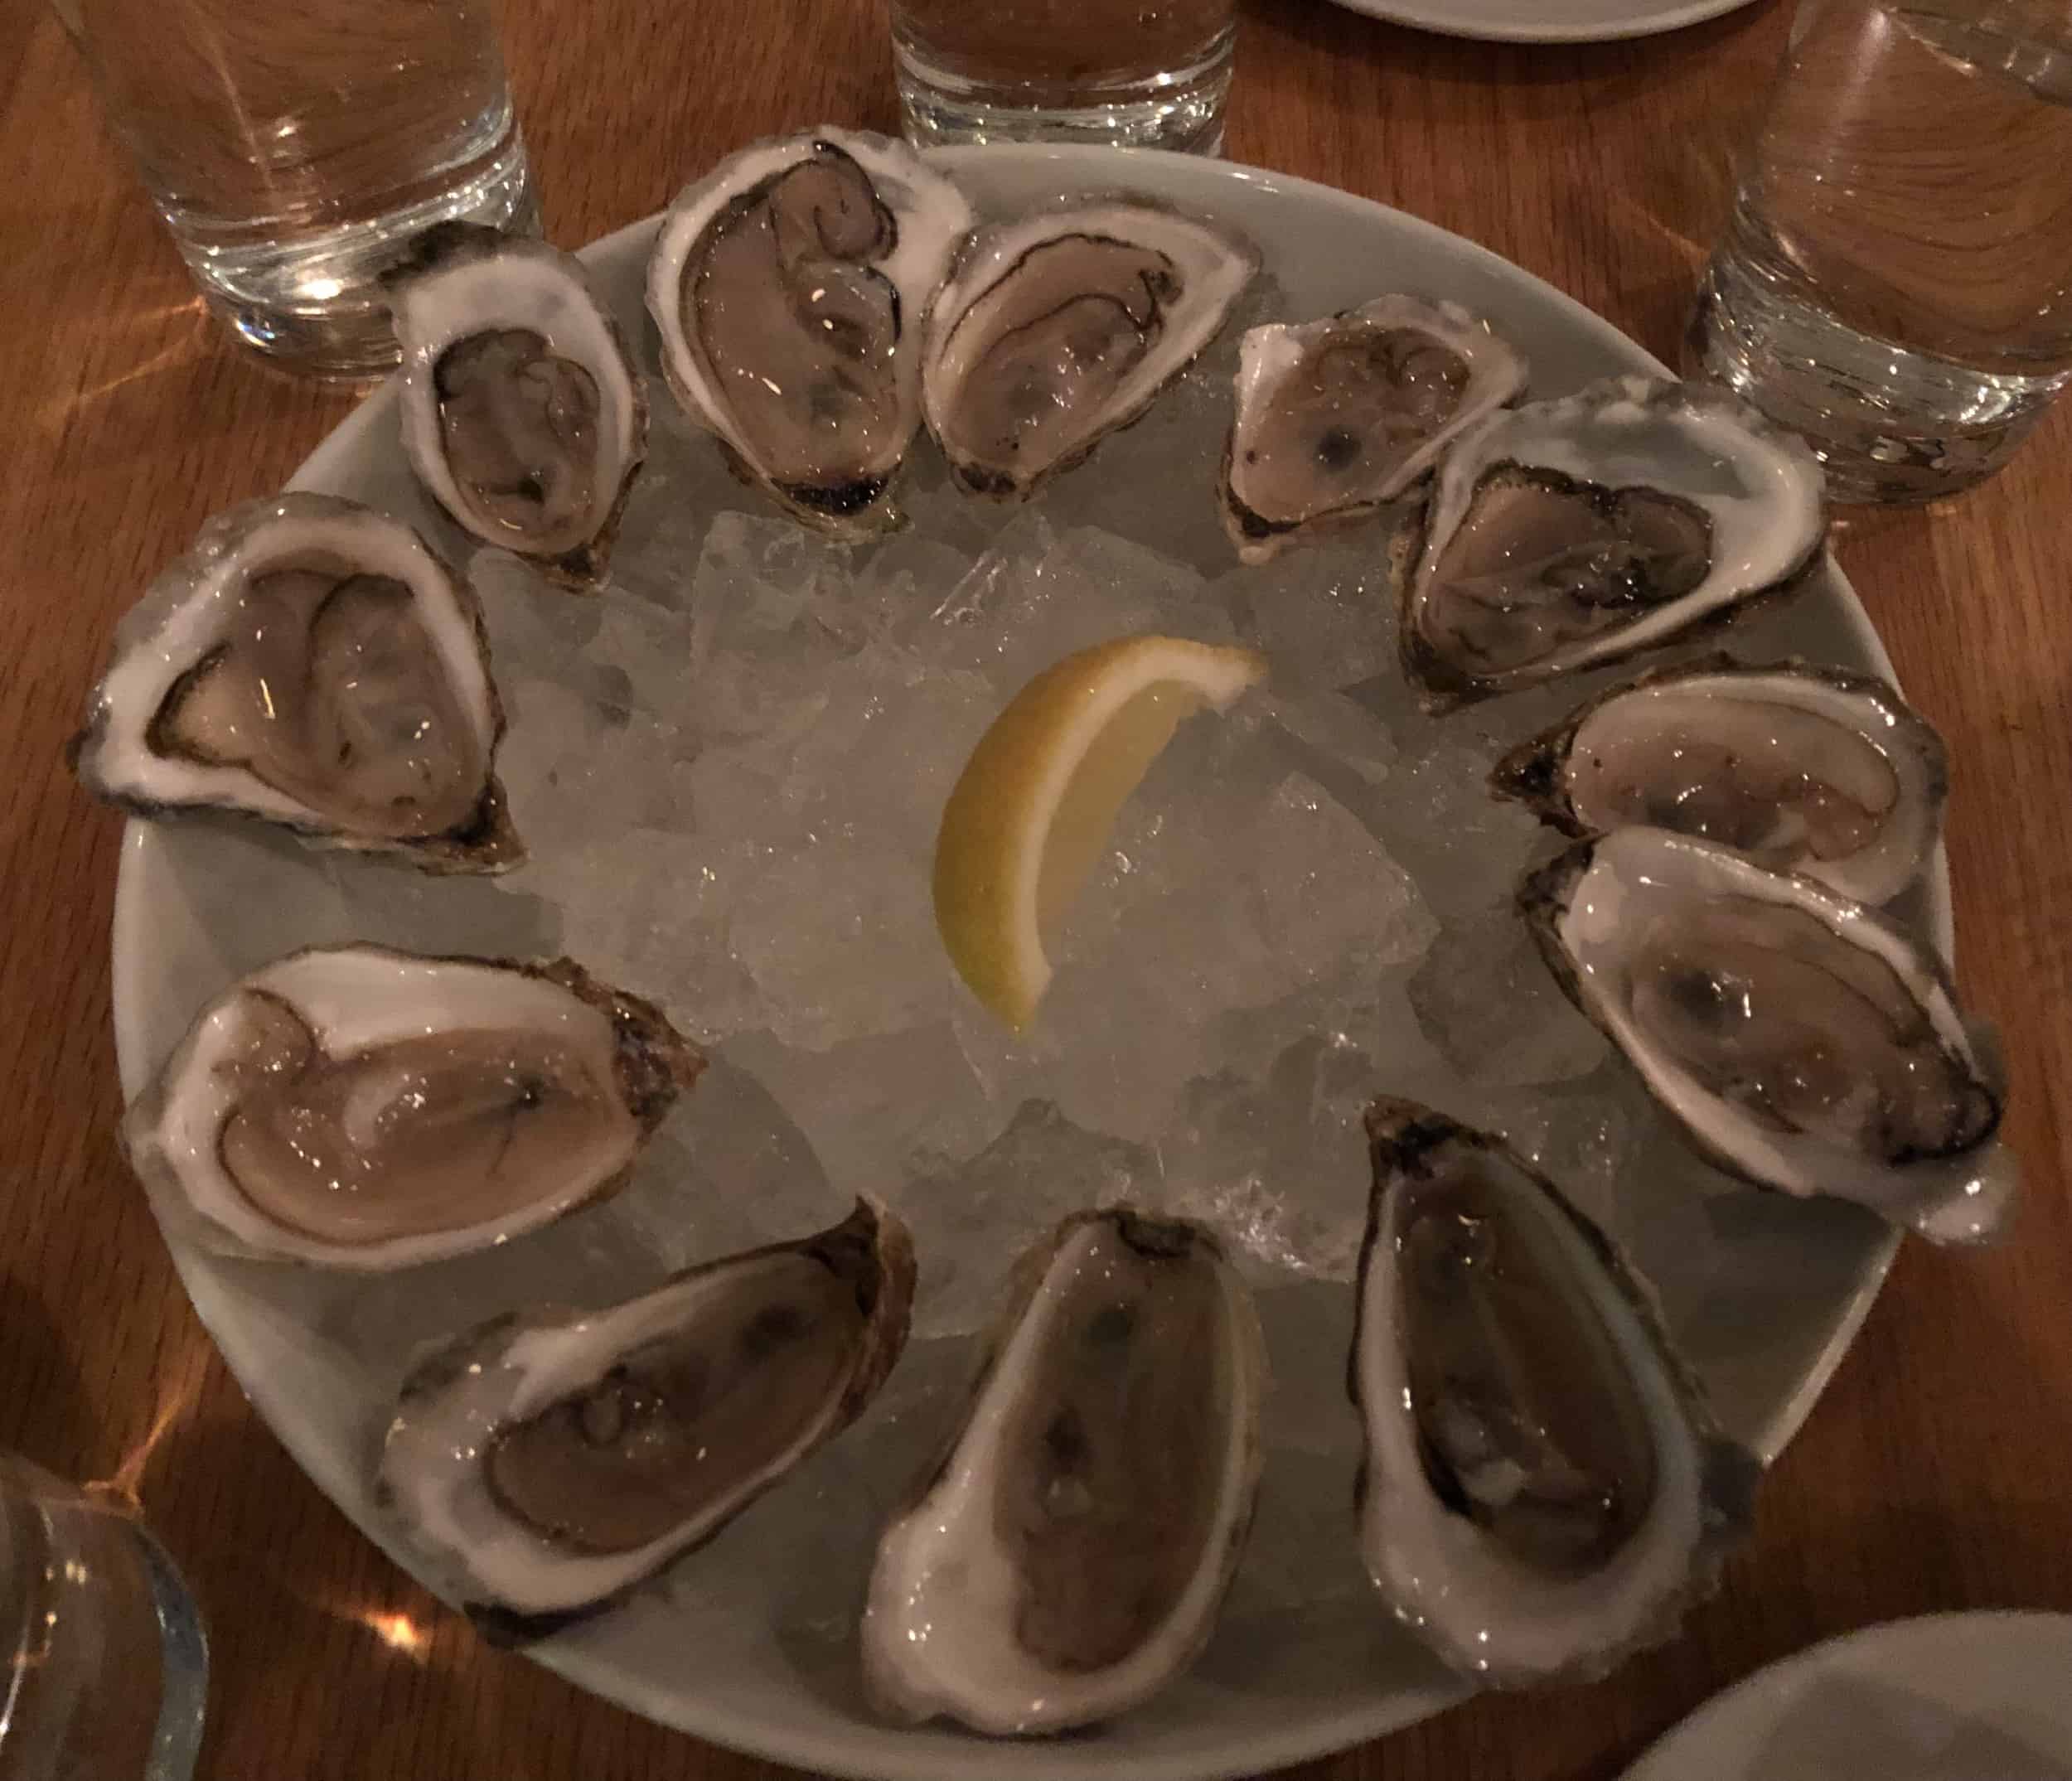 Oysters on the half shell at Main + Lincoln